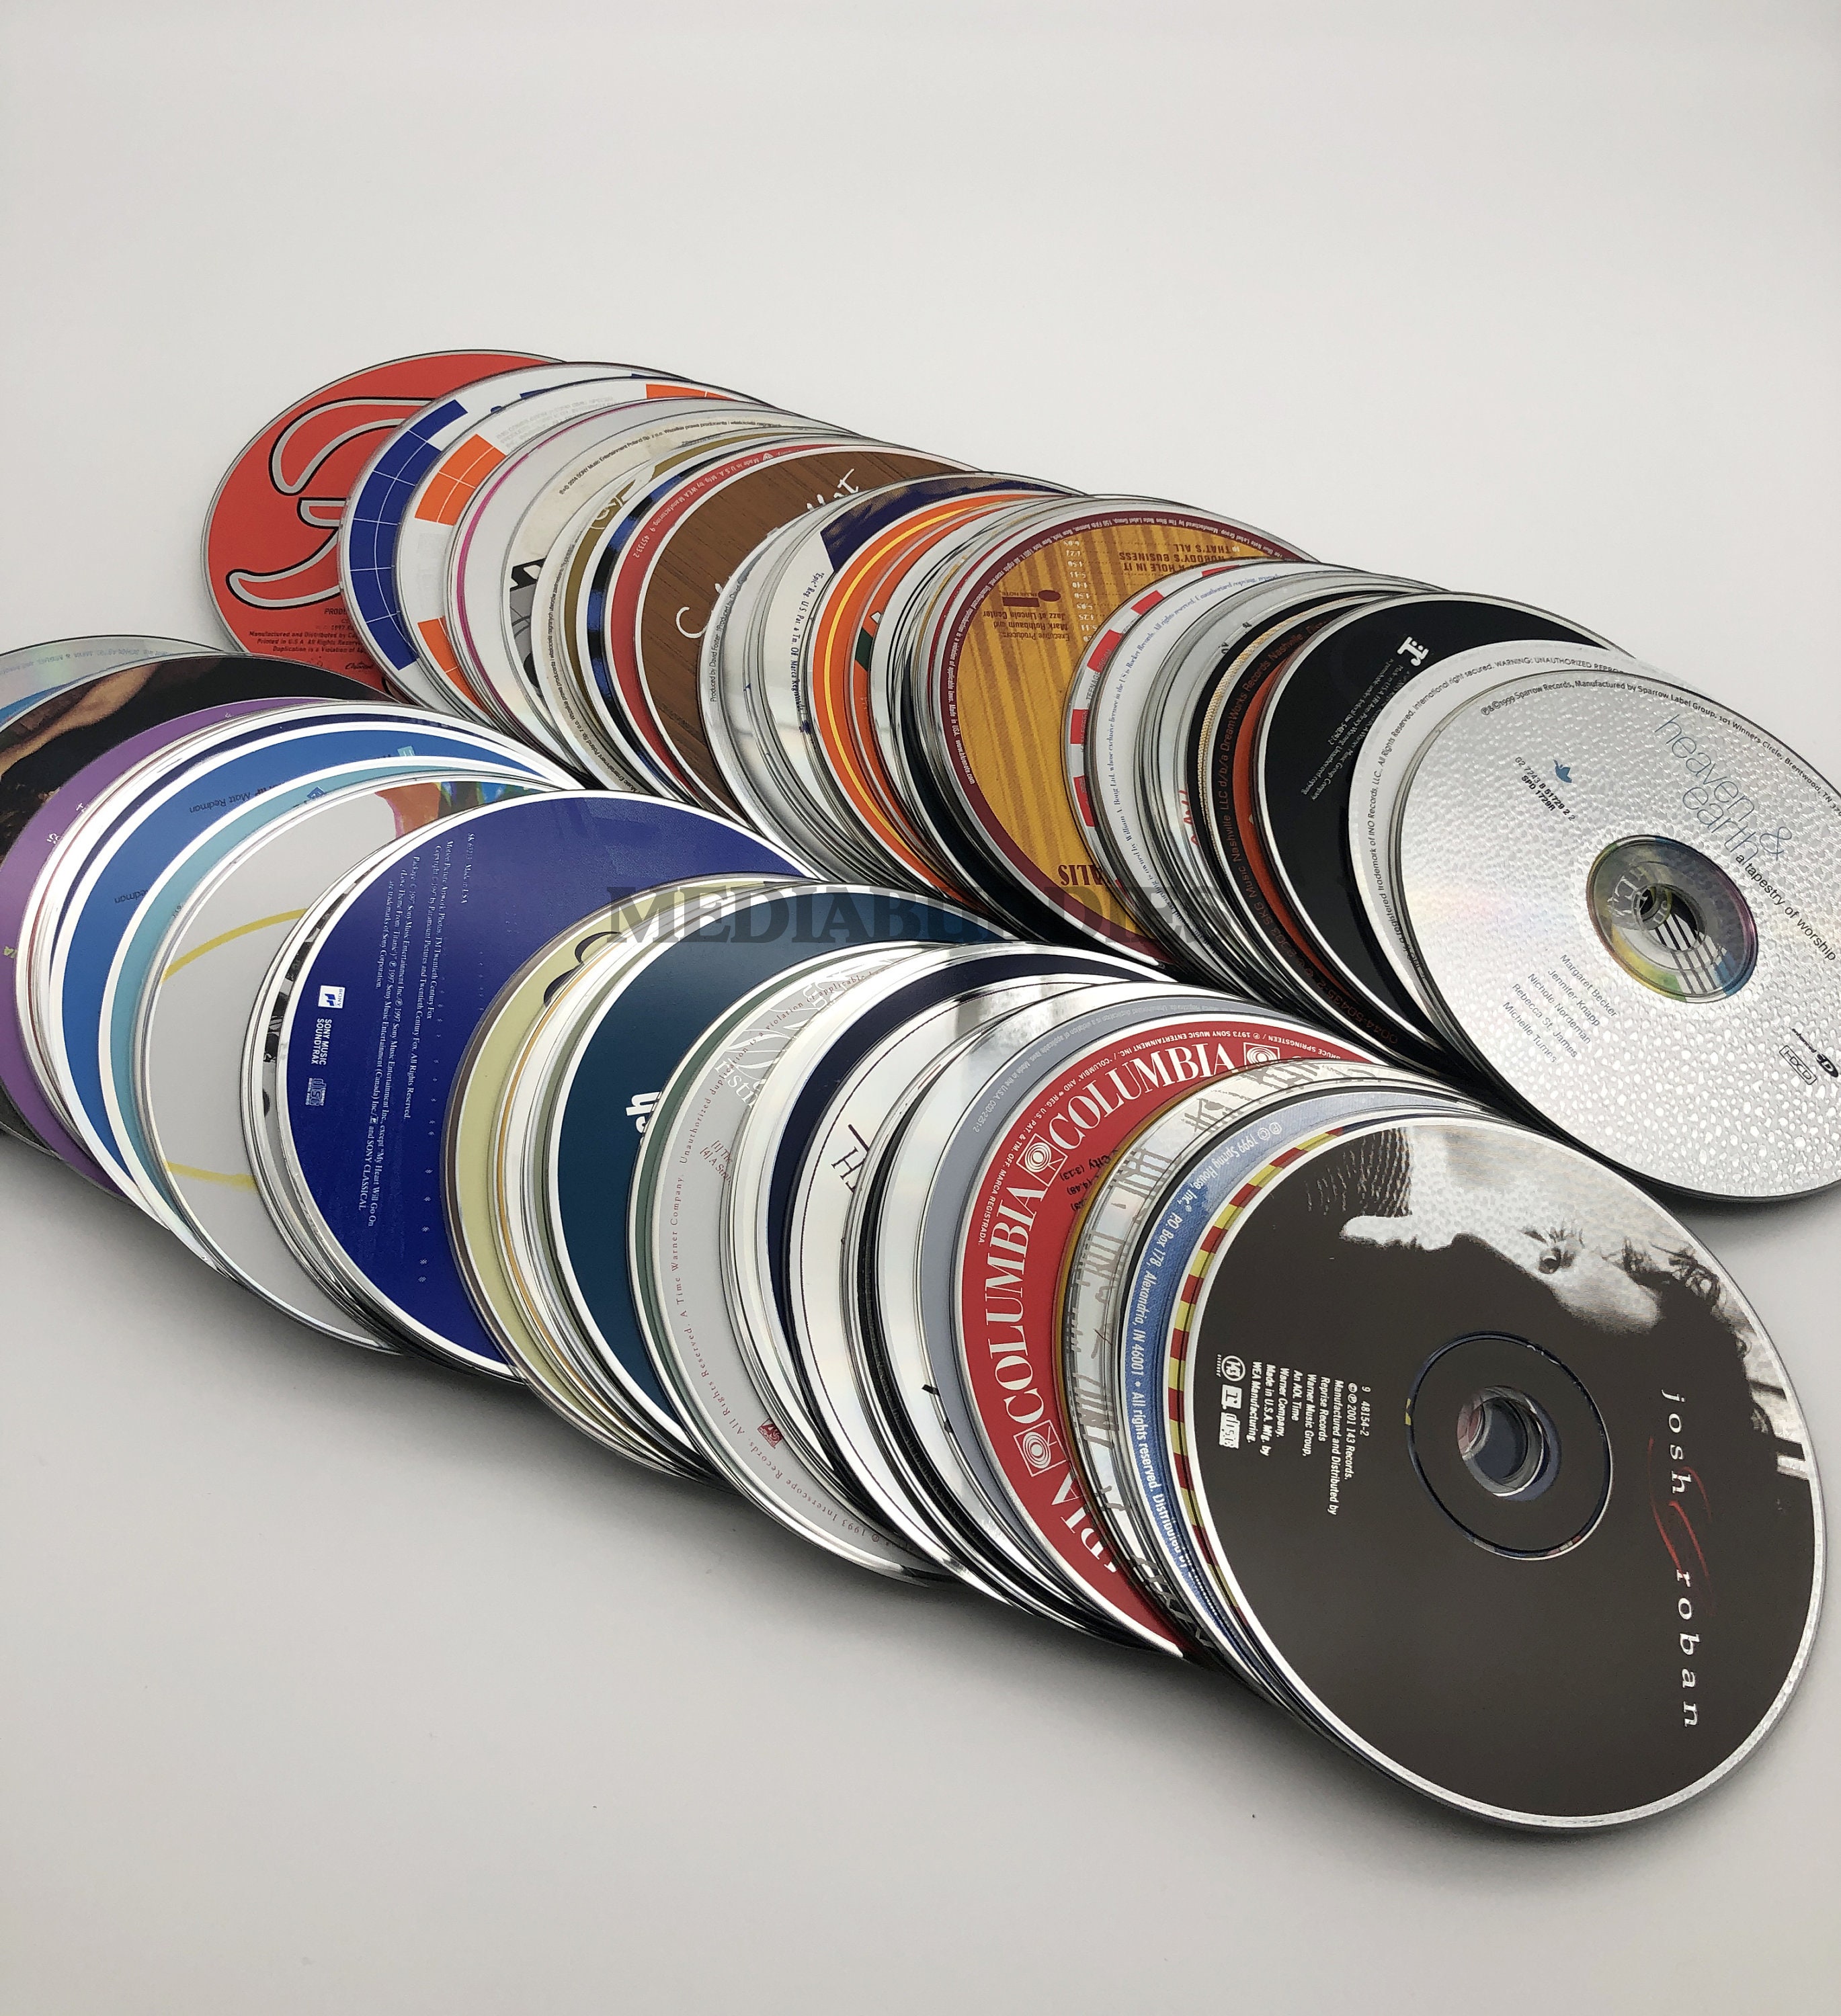 Huge Wholesale Lot of 100 Cds Music Assorted Cds Audio Bulk Mixed Used  Music Mystery Lot Bundle Best Collection Variety Wholesale Price 